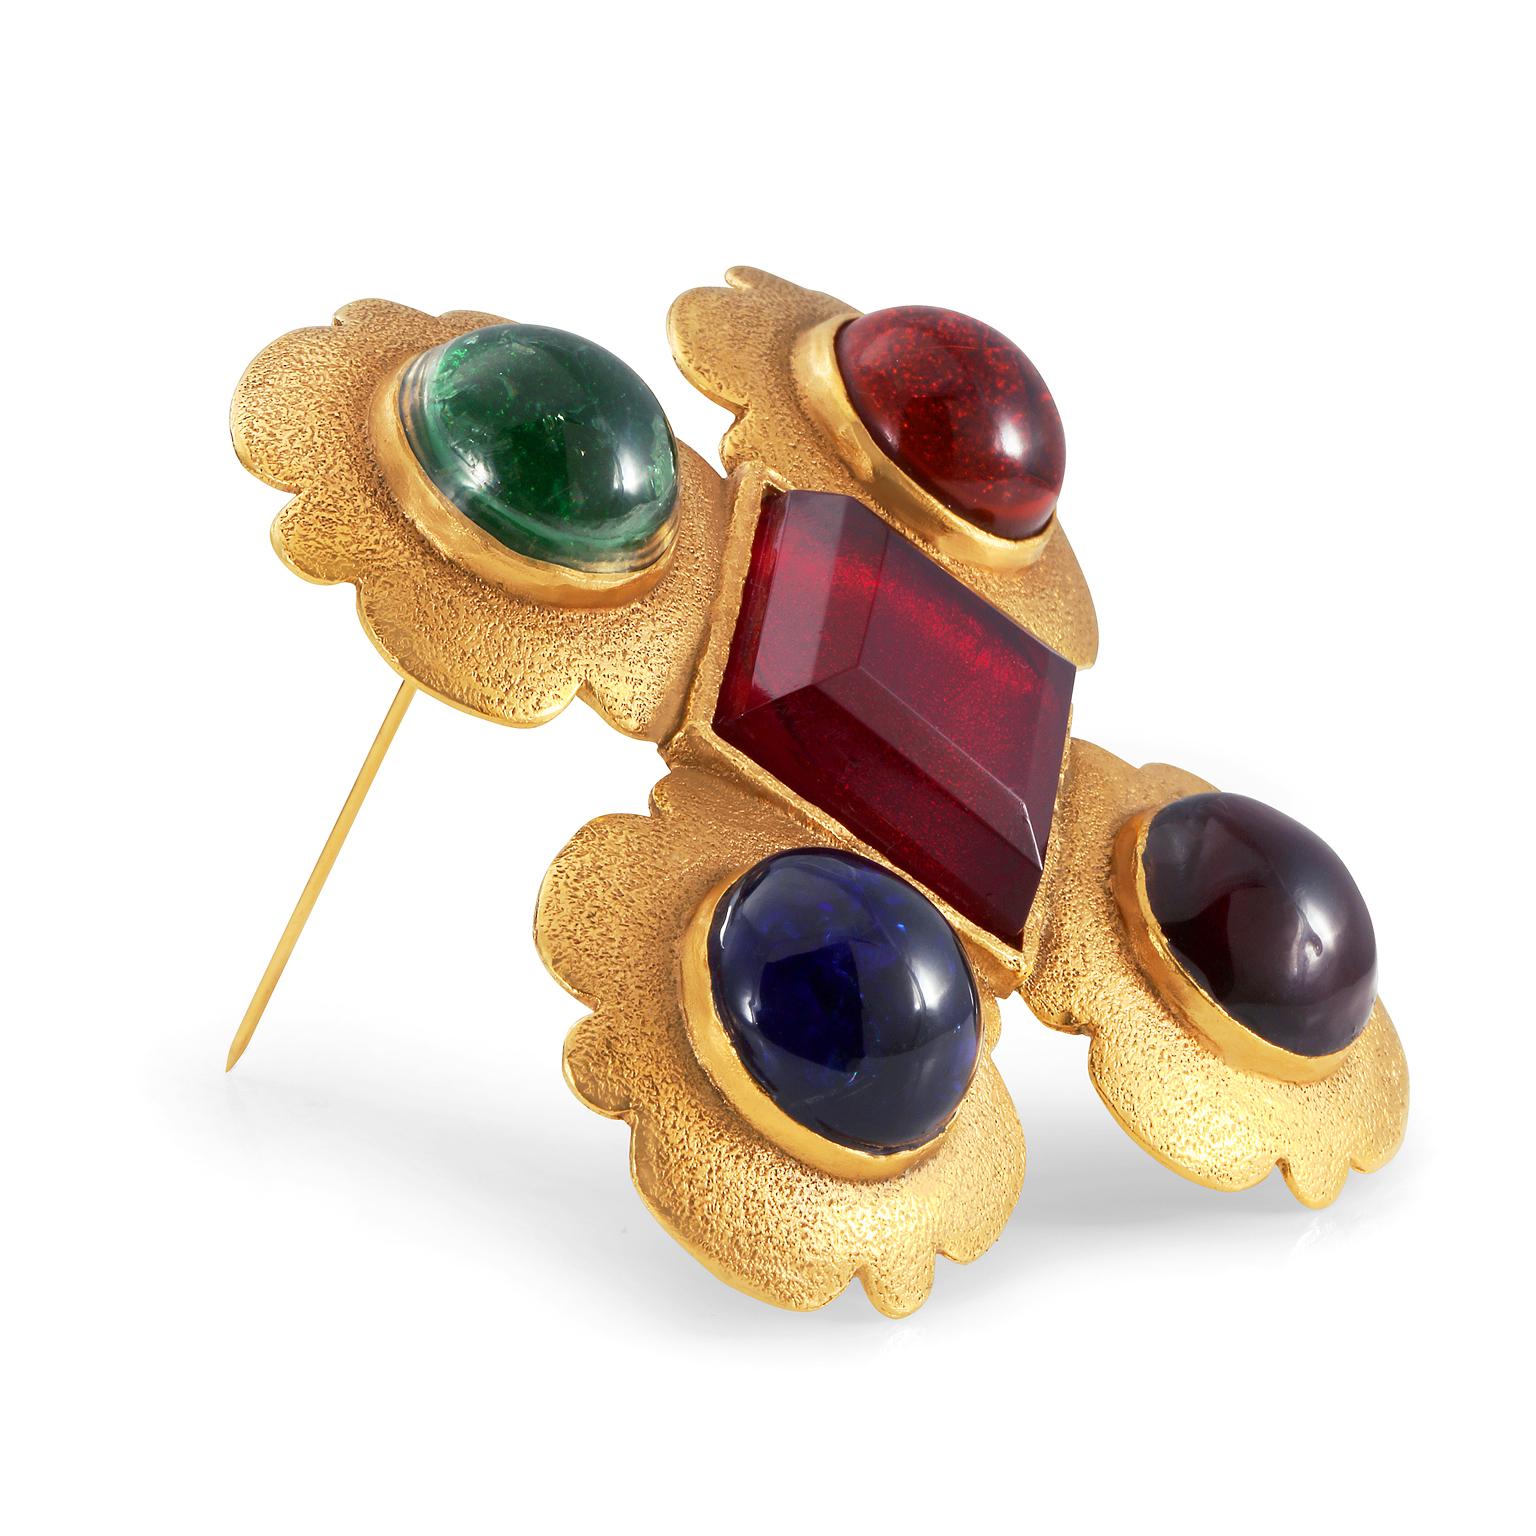 This authentic Chanel Multi Color Cabochon Gripoix Brooch is in excellent vintage condition from the mid to late 1980’s.  Hammered gold Maltese cross is adorned with Gripoix glass jewels in red, green and indigo.  Numbered on the back. 